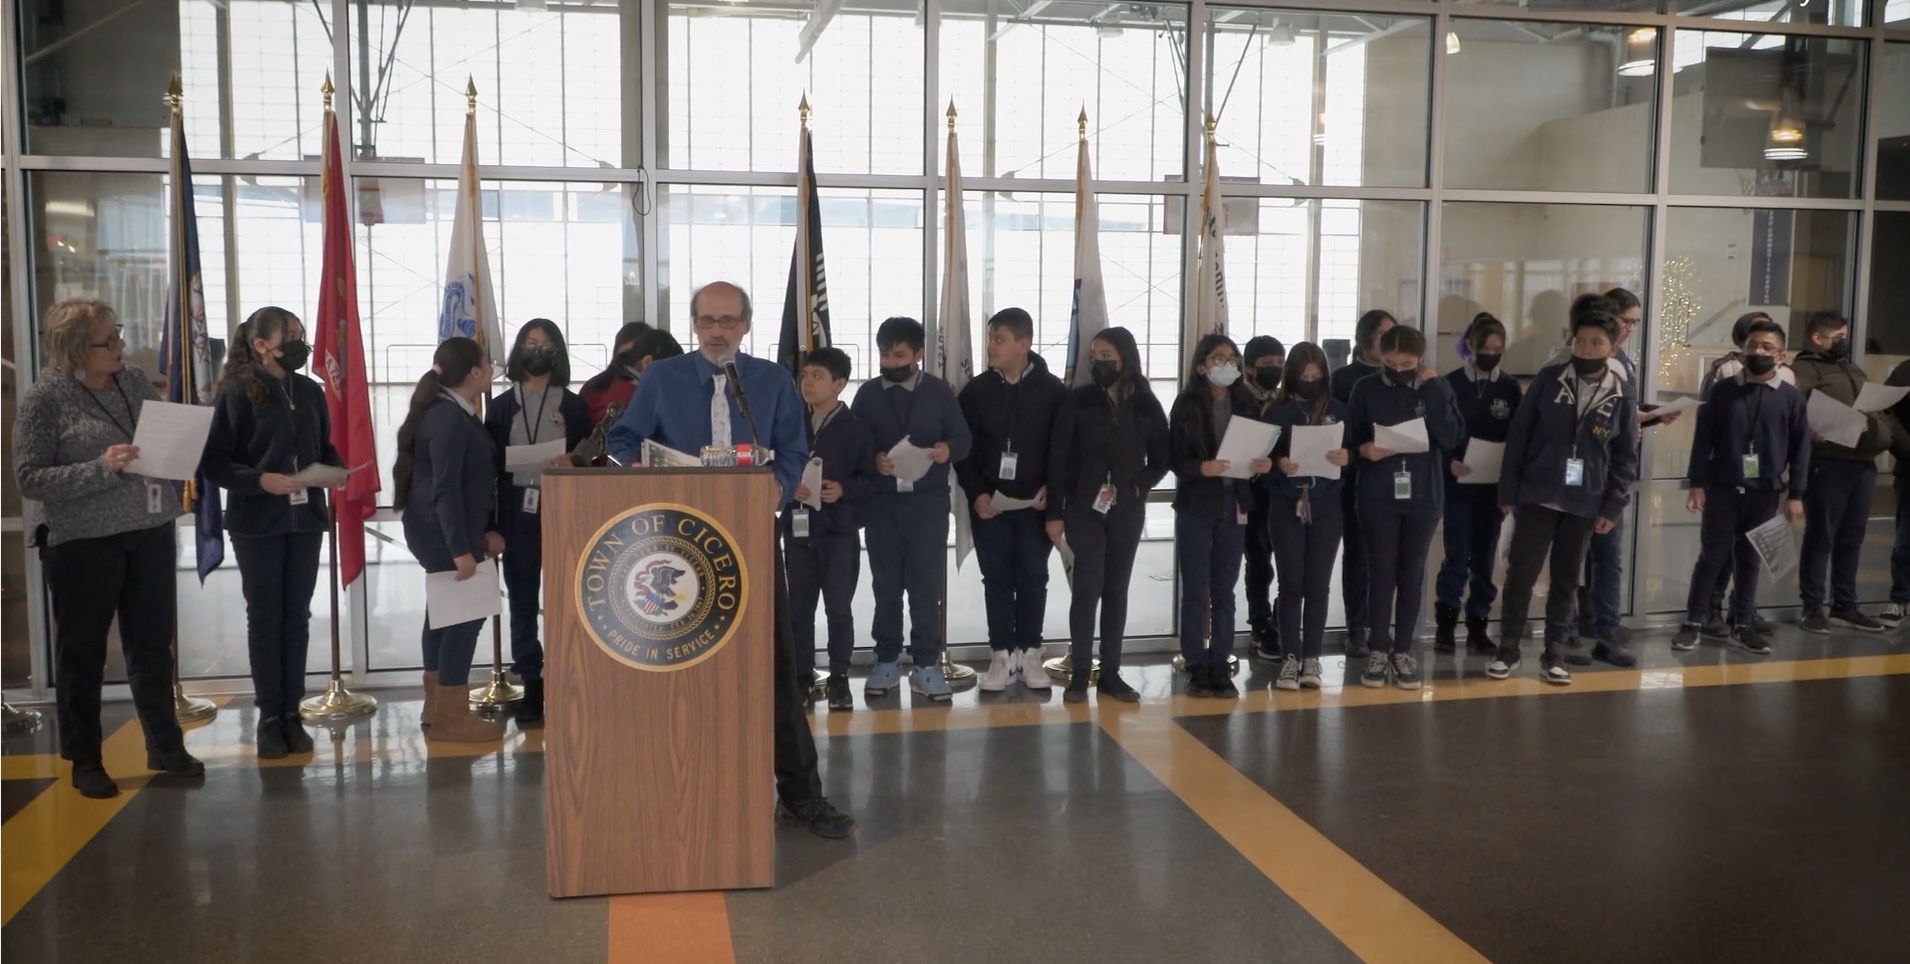 Cicero East school students wrote a pledge to Remember Pearl Harbor and recited the pledge at the Dec. 7, 2022 at the Town of Cicero commemoration of Pearl Harbor.